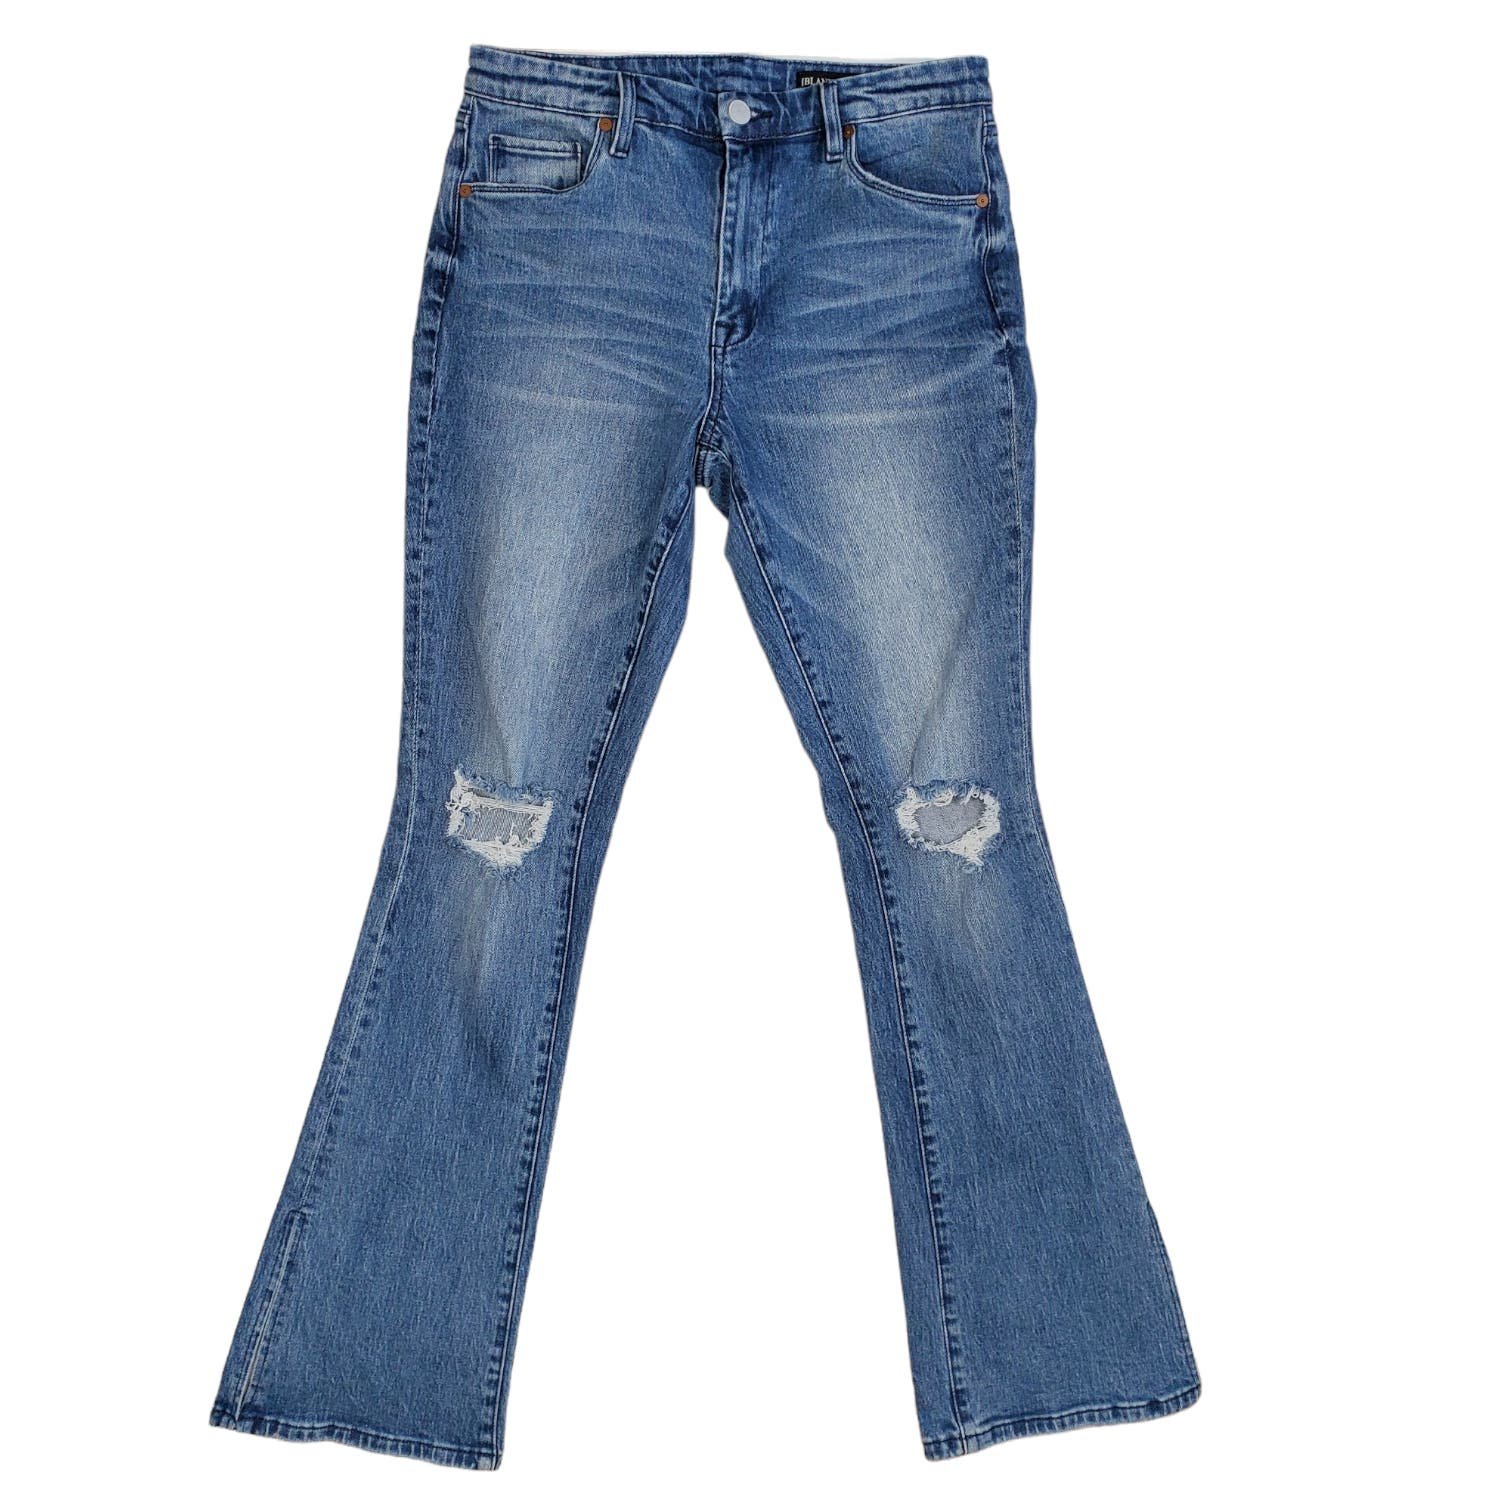 Affordable BlankNYC Hoyt Boot Cut Slit Jeans Distressed